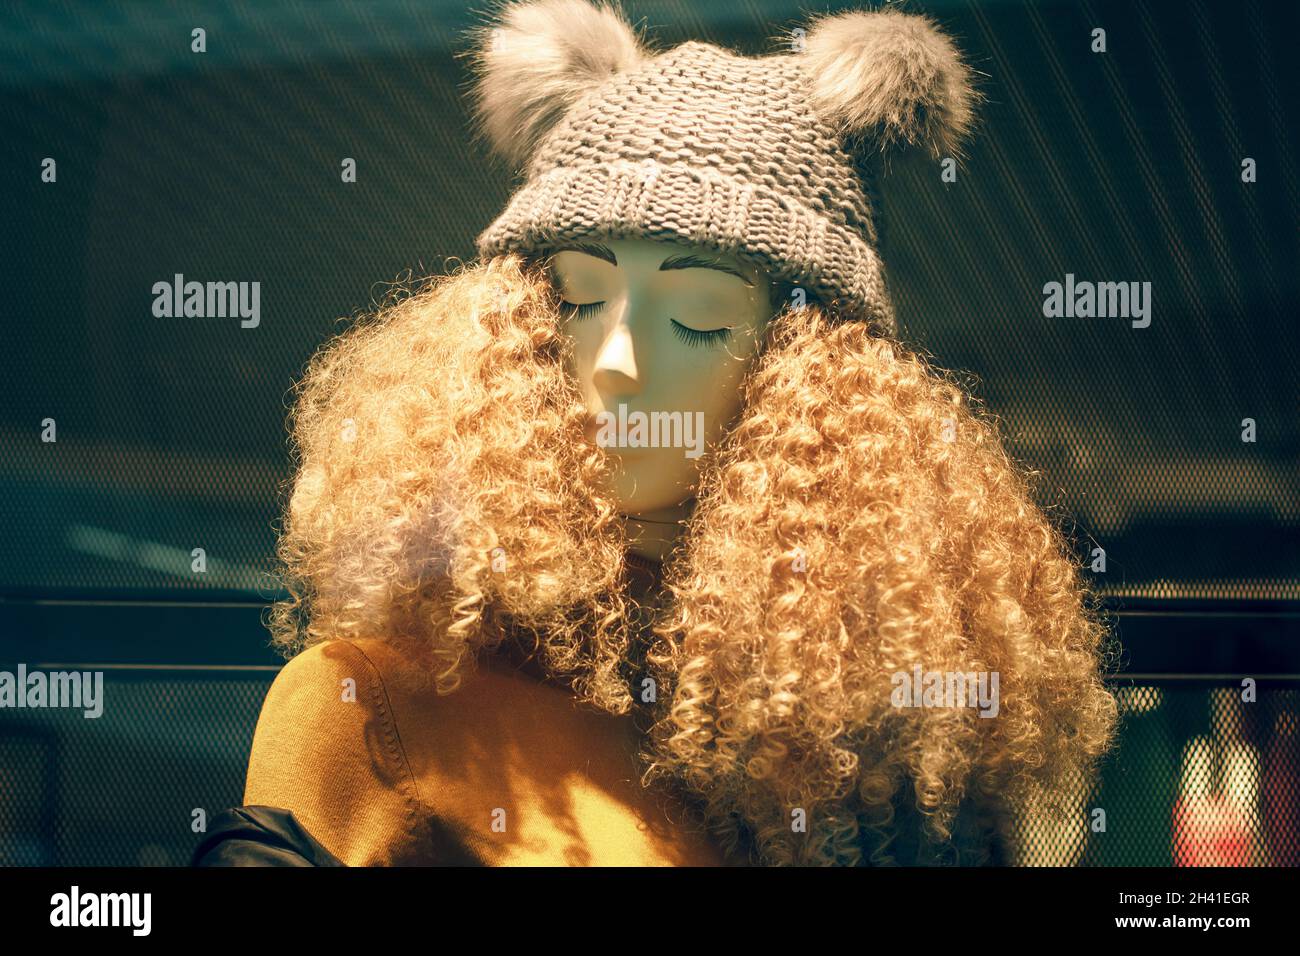 POLAND, BYDGOSZCZ - 15 february 2020: Funny mannequin in shop window. Female dummy with unruly curly hair and hat. Women's shopping. Beauty industry Stock Photo